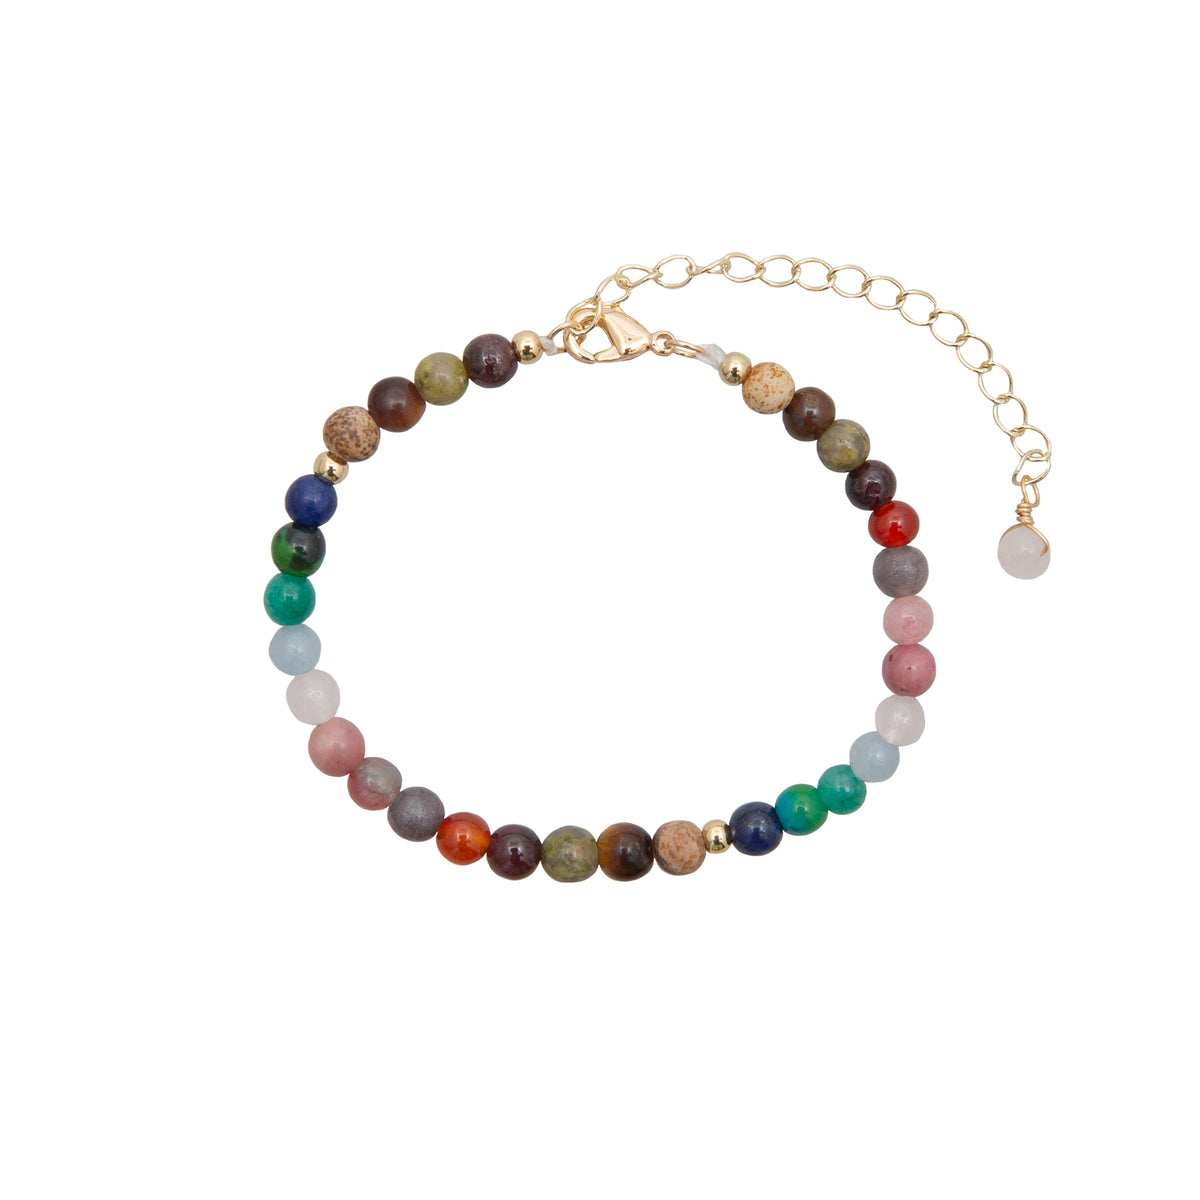 4mm multicolor stone healing bracelet on a gold chain